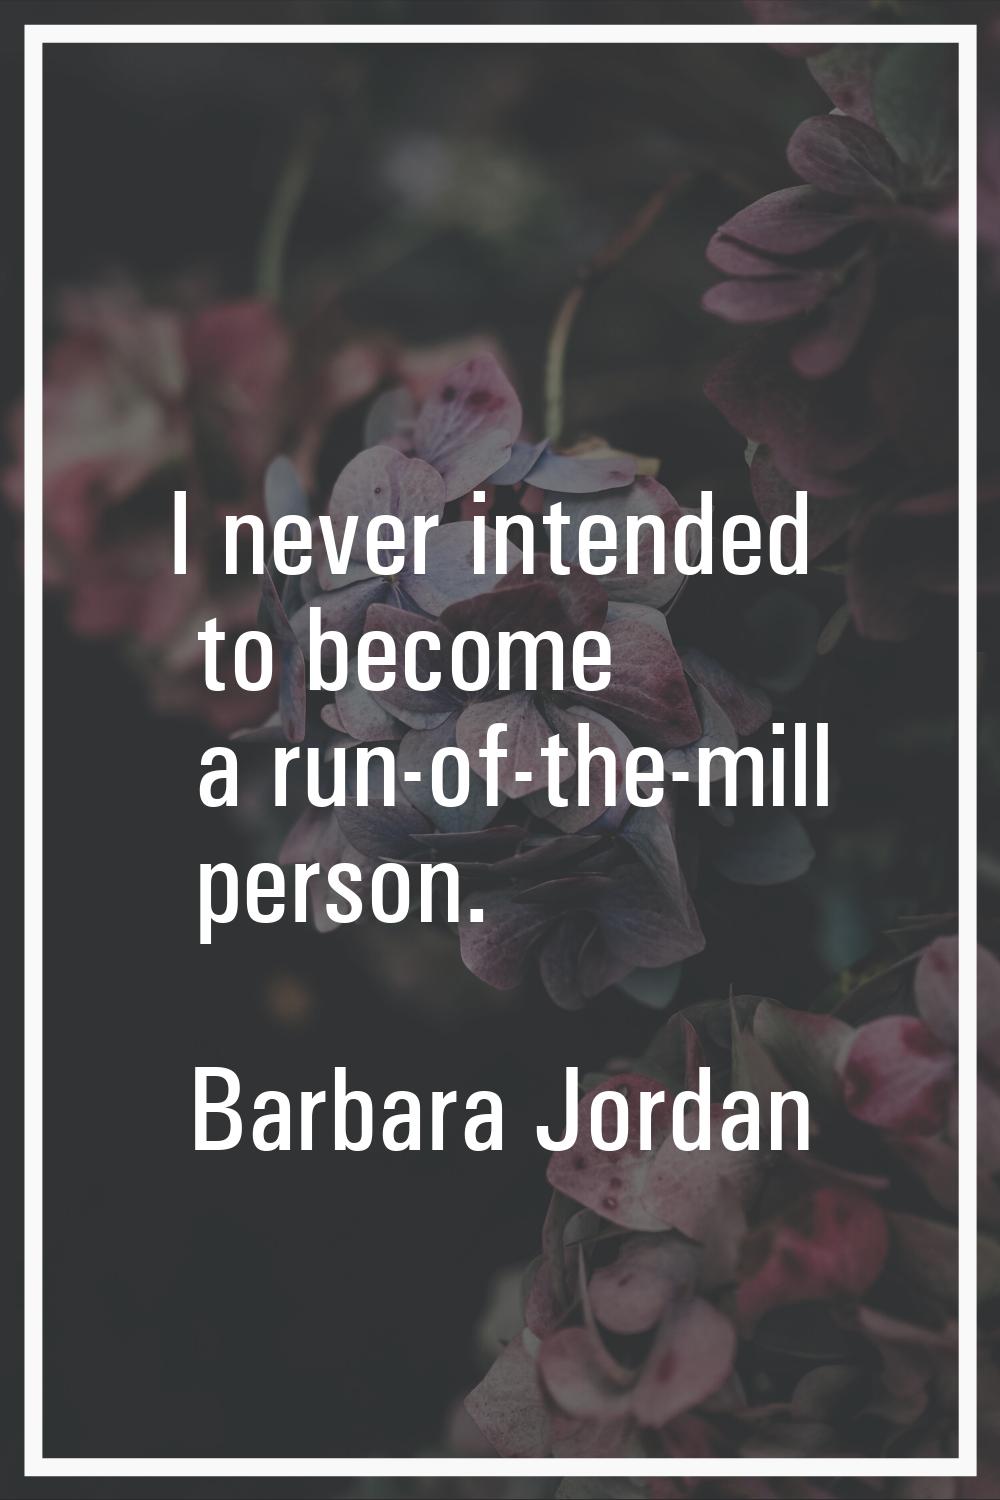 I never intended to become a run-of-the-mill person.